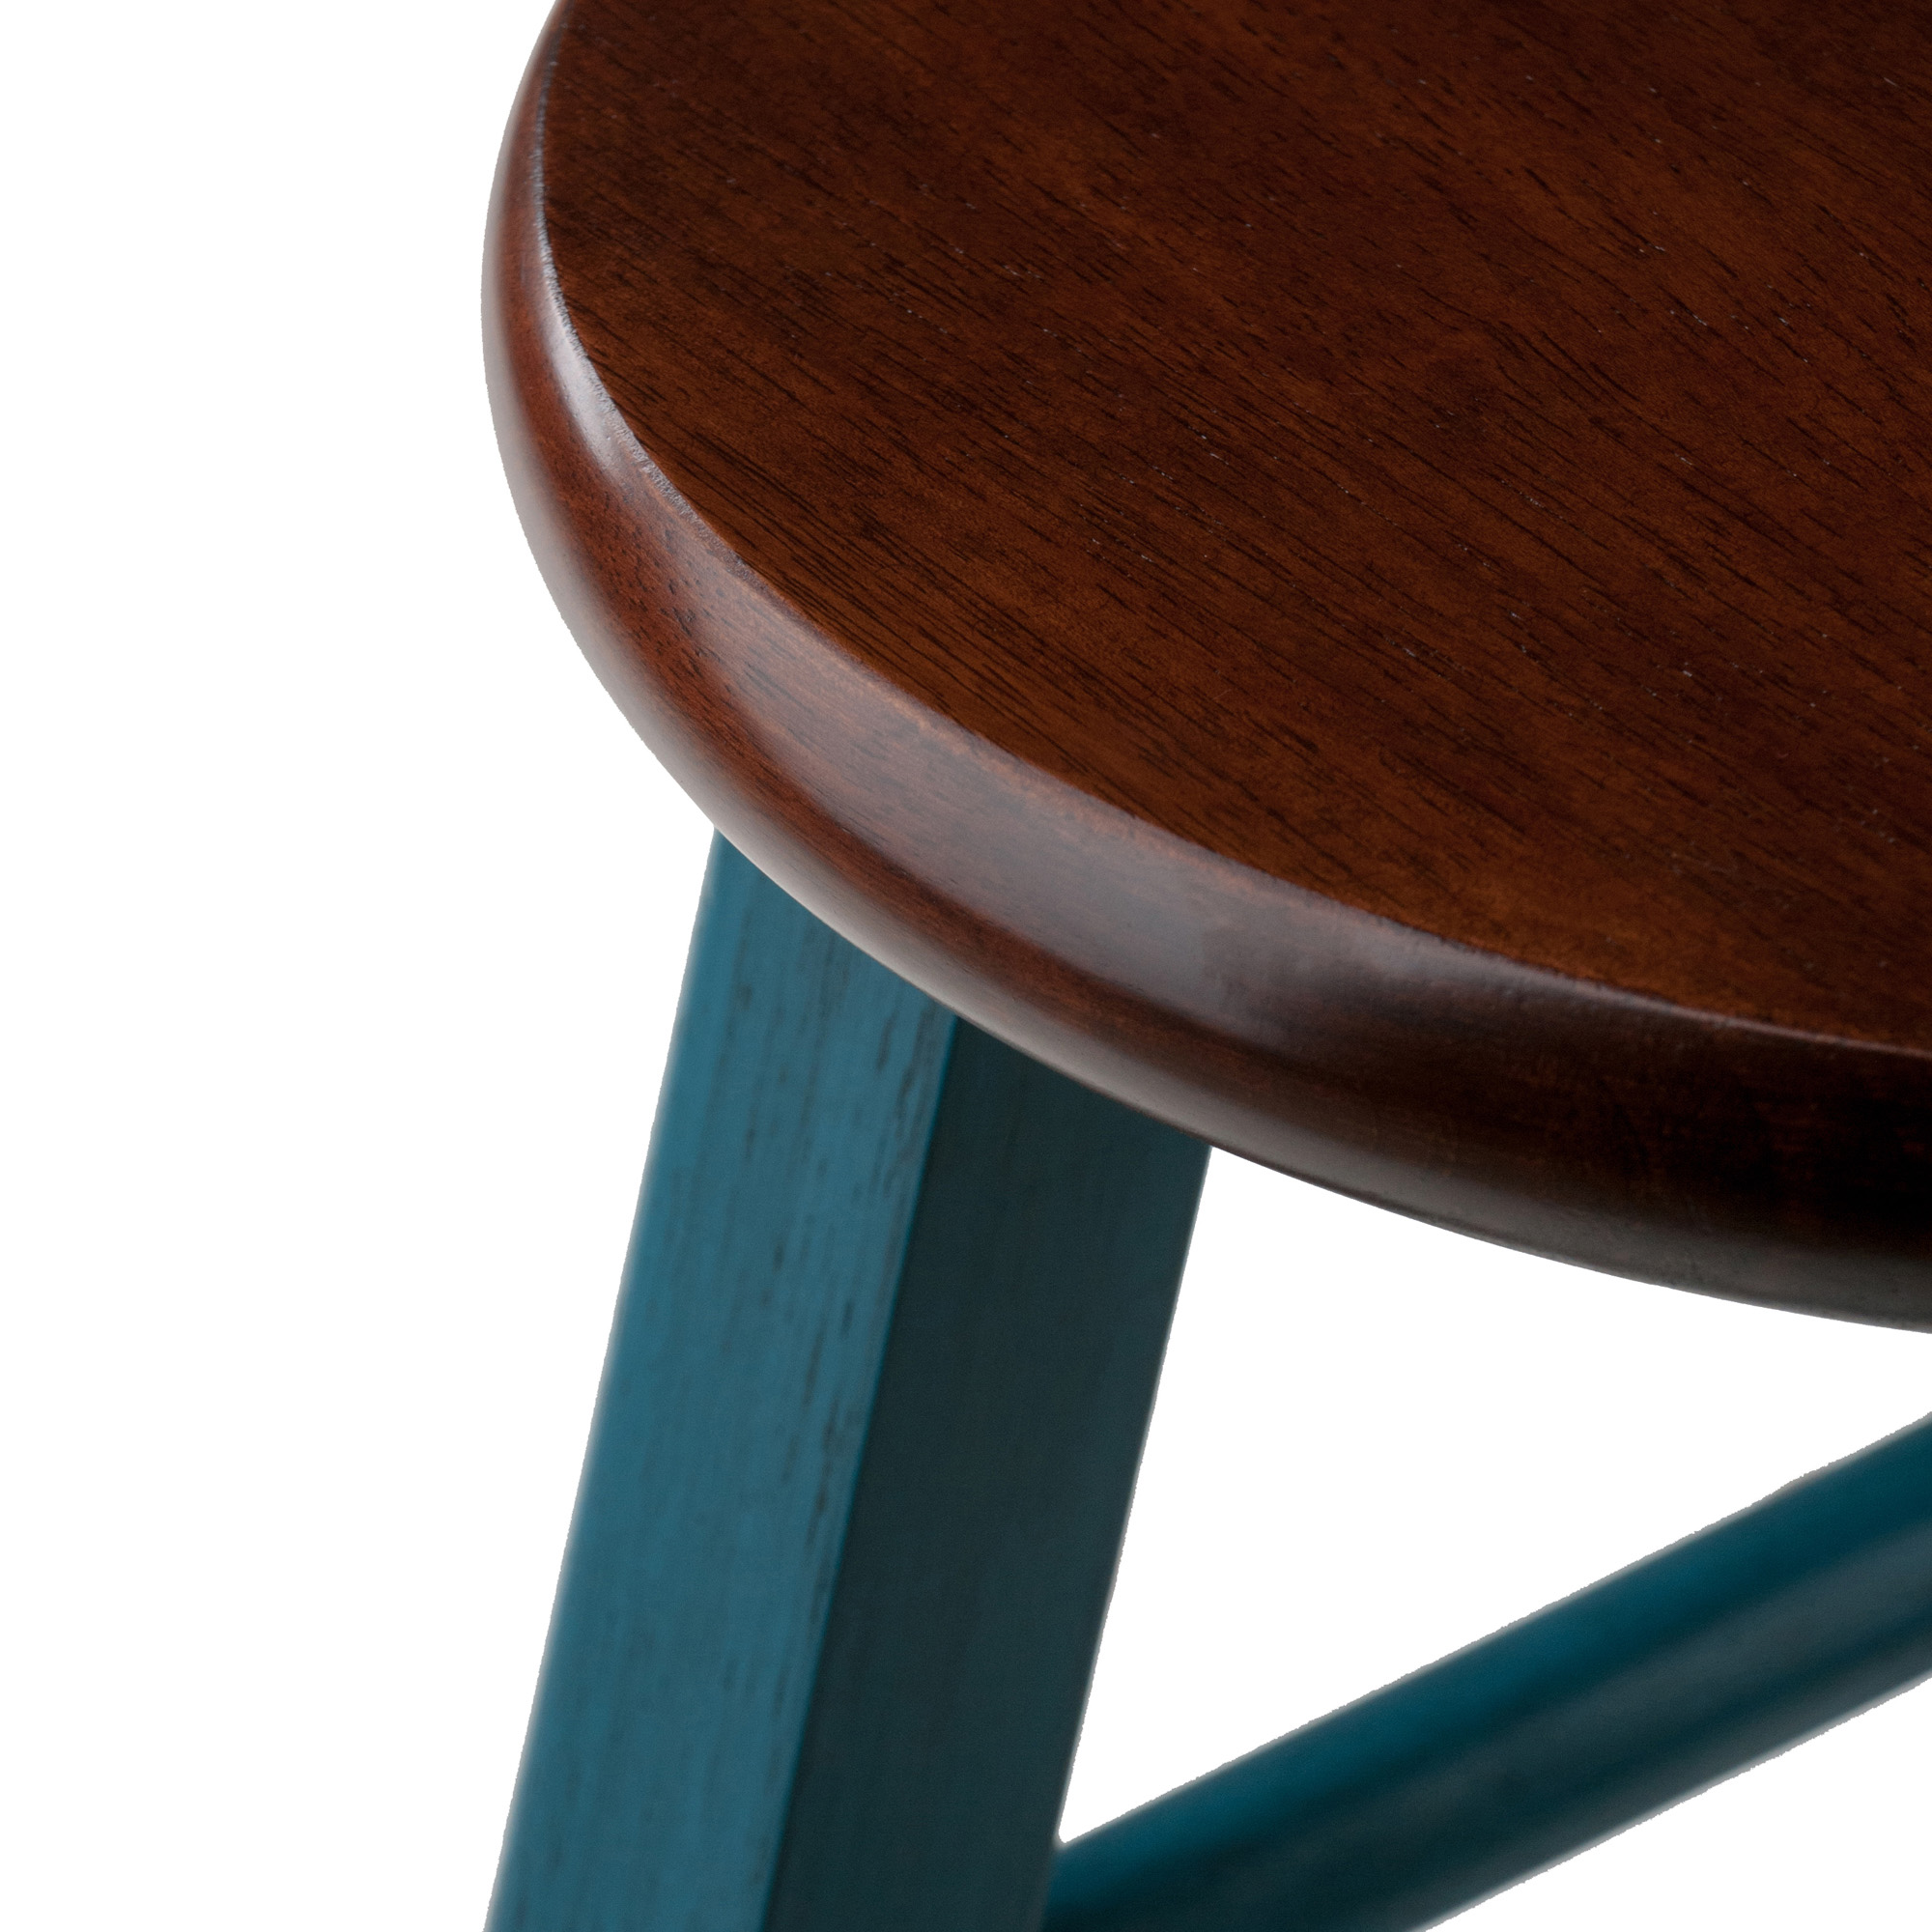 Winsome Wood Ivy 24" Counter Stool, Rustic Teal & Walnut Finish - image 2 of 6